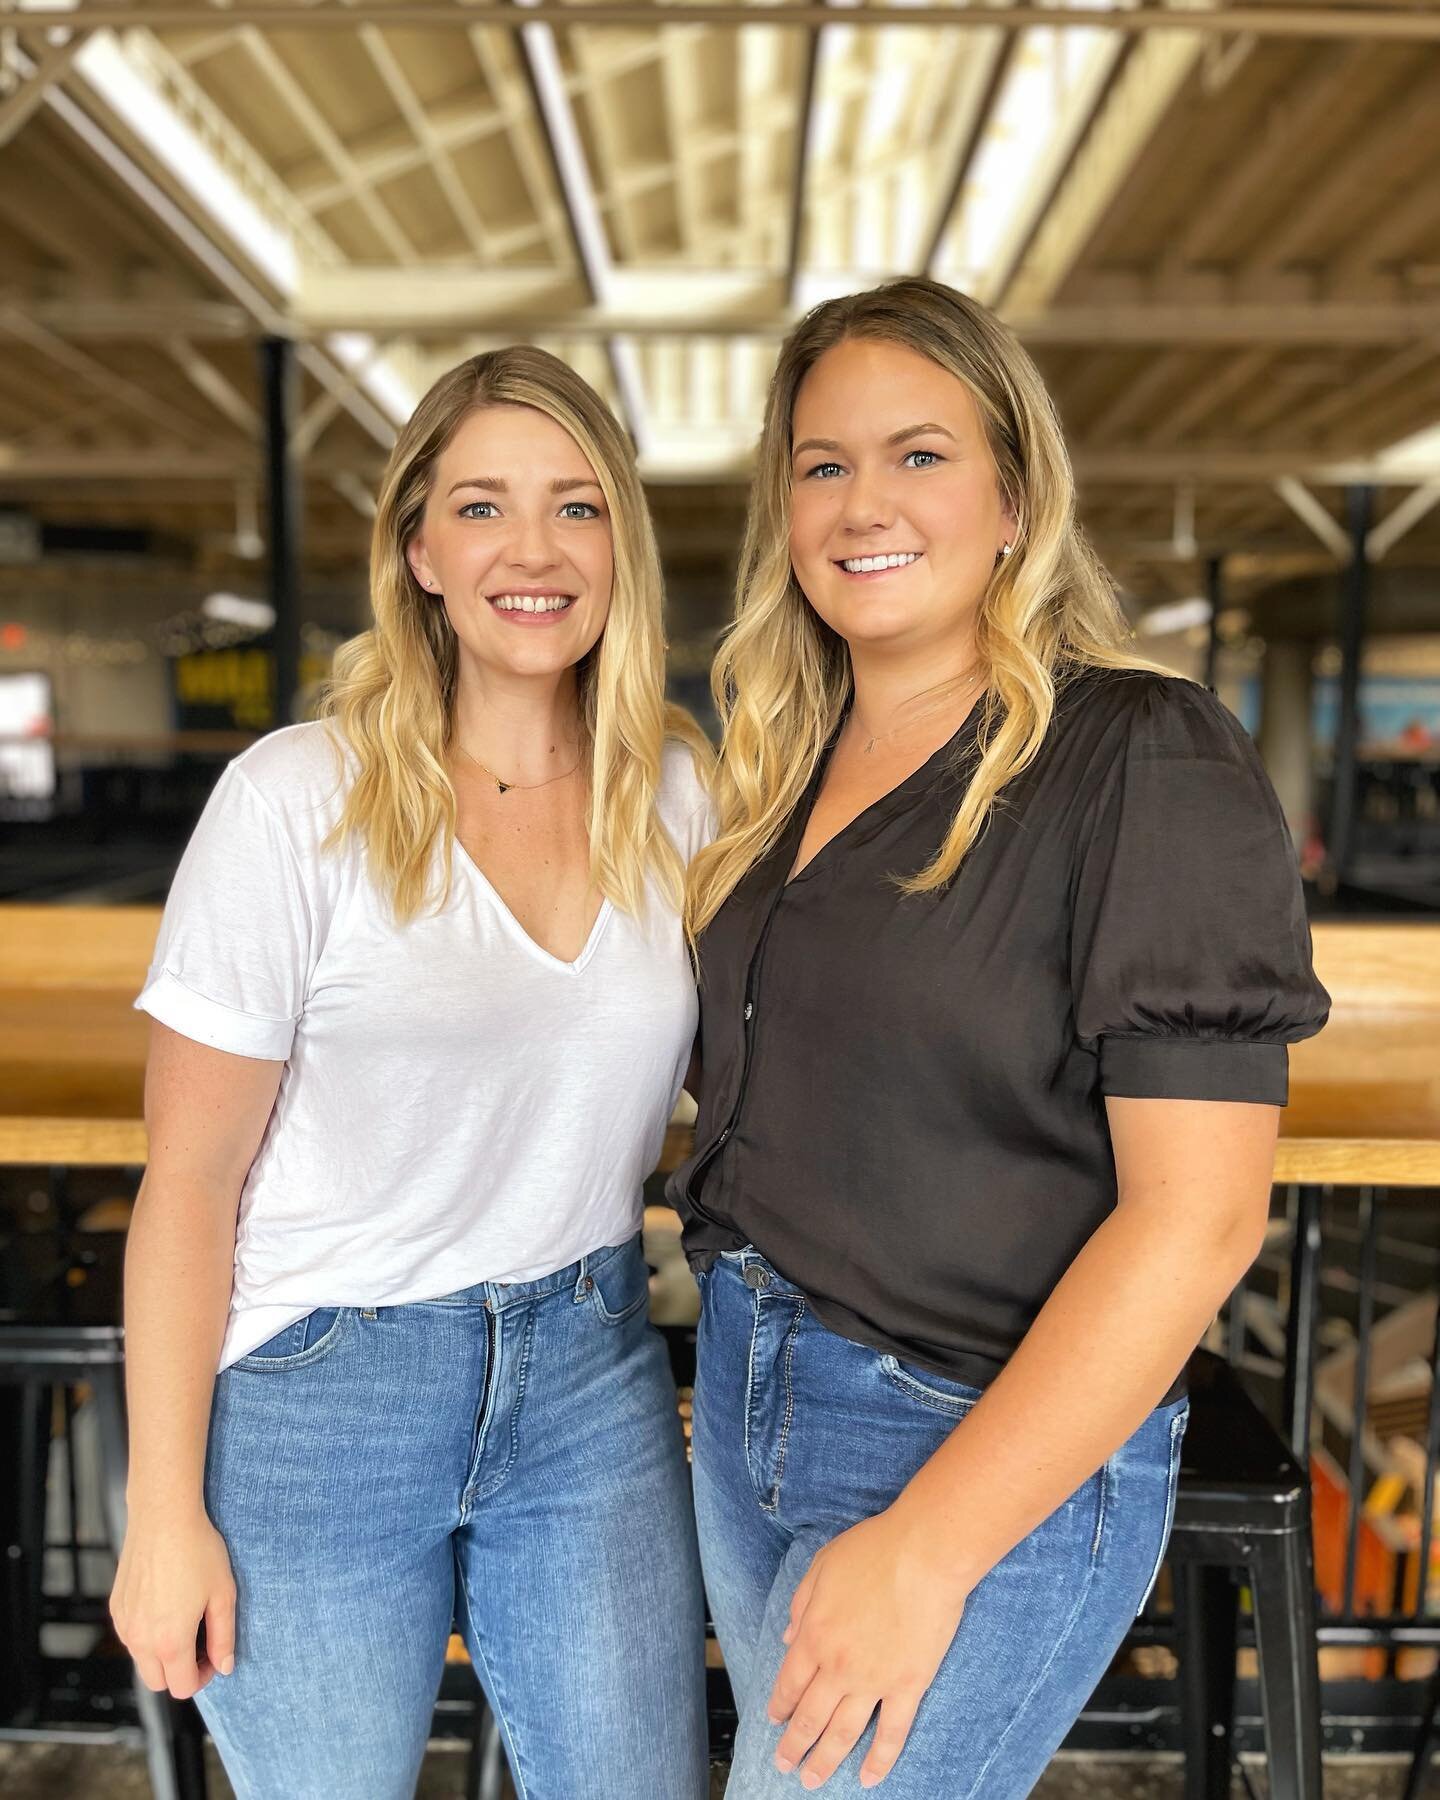 Check out our stories or go to @cillafaye to see our full @northmarket tour after our team meeting ✨